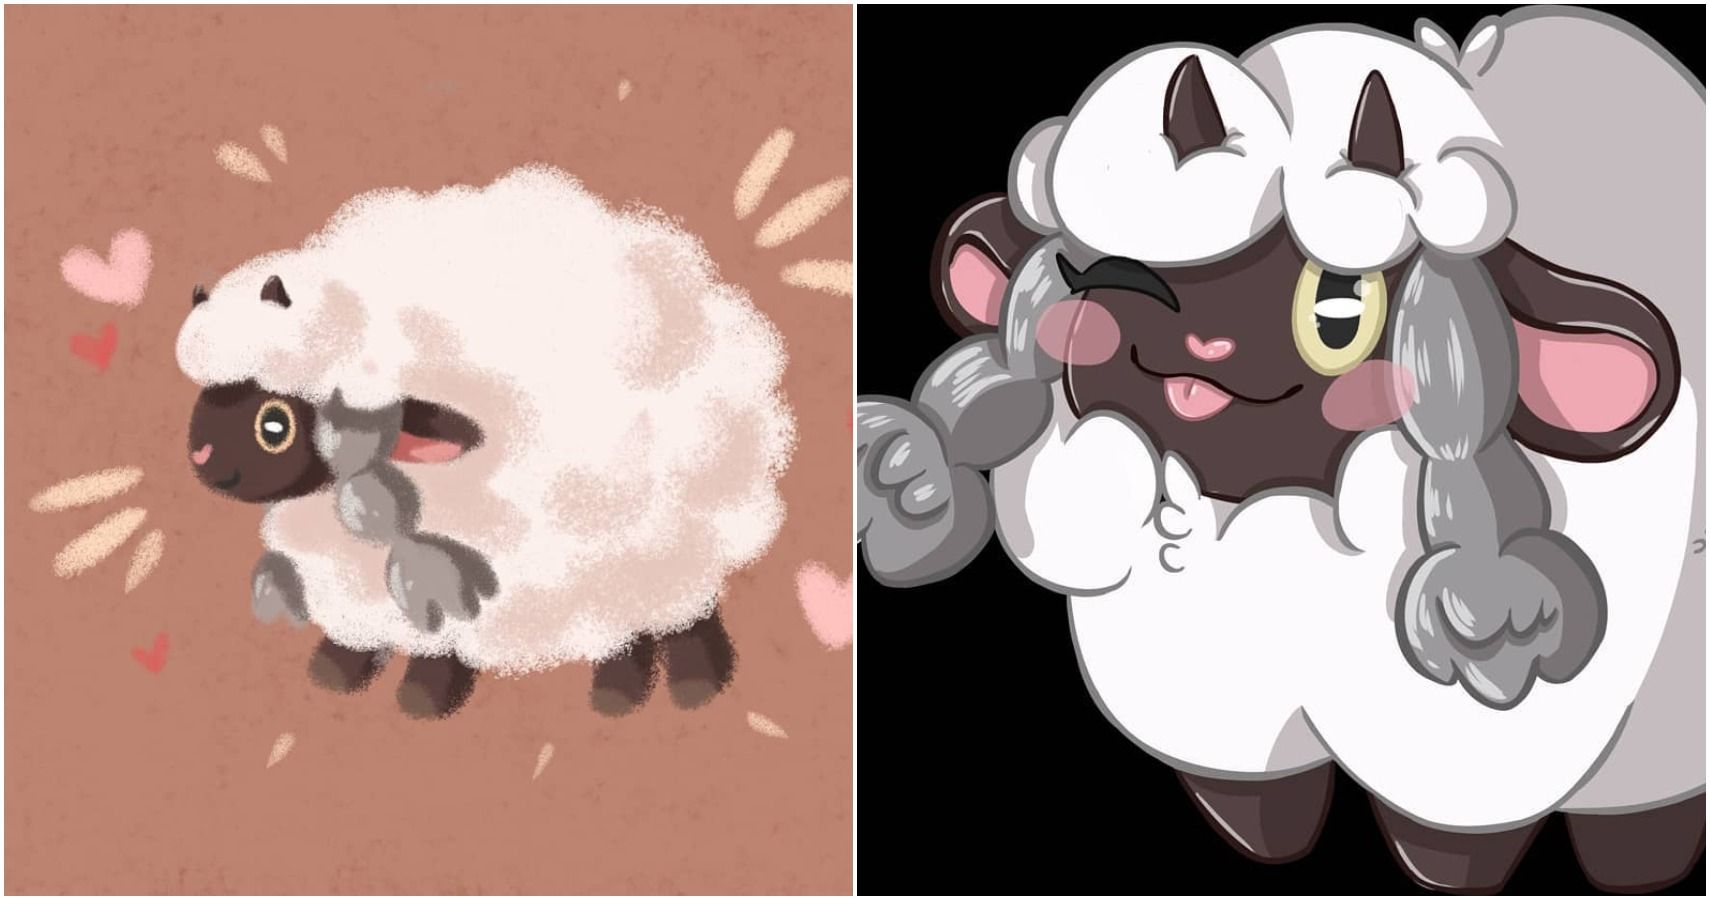 Pokémon Sword And Shield 10 Wooloo Fan Art Pictures That Look Just Like The Games 